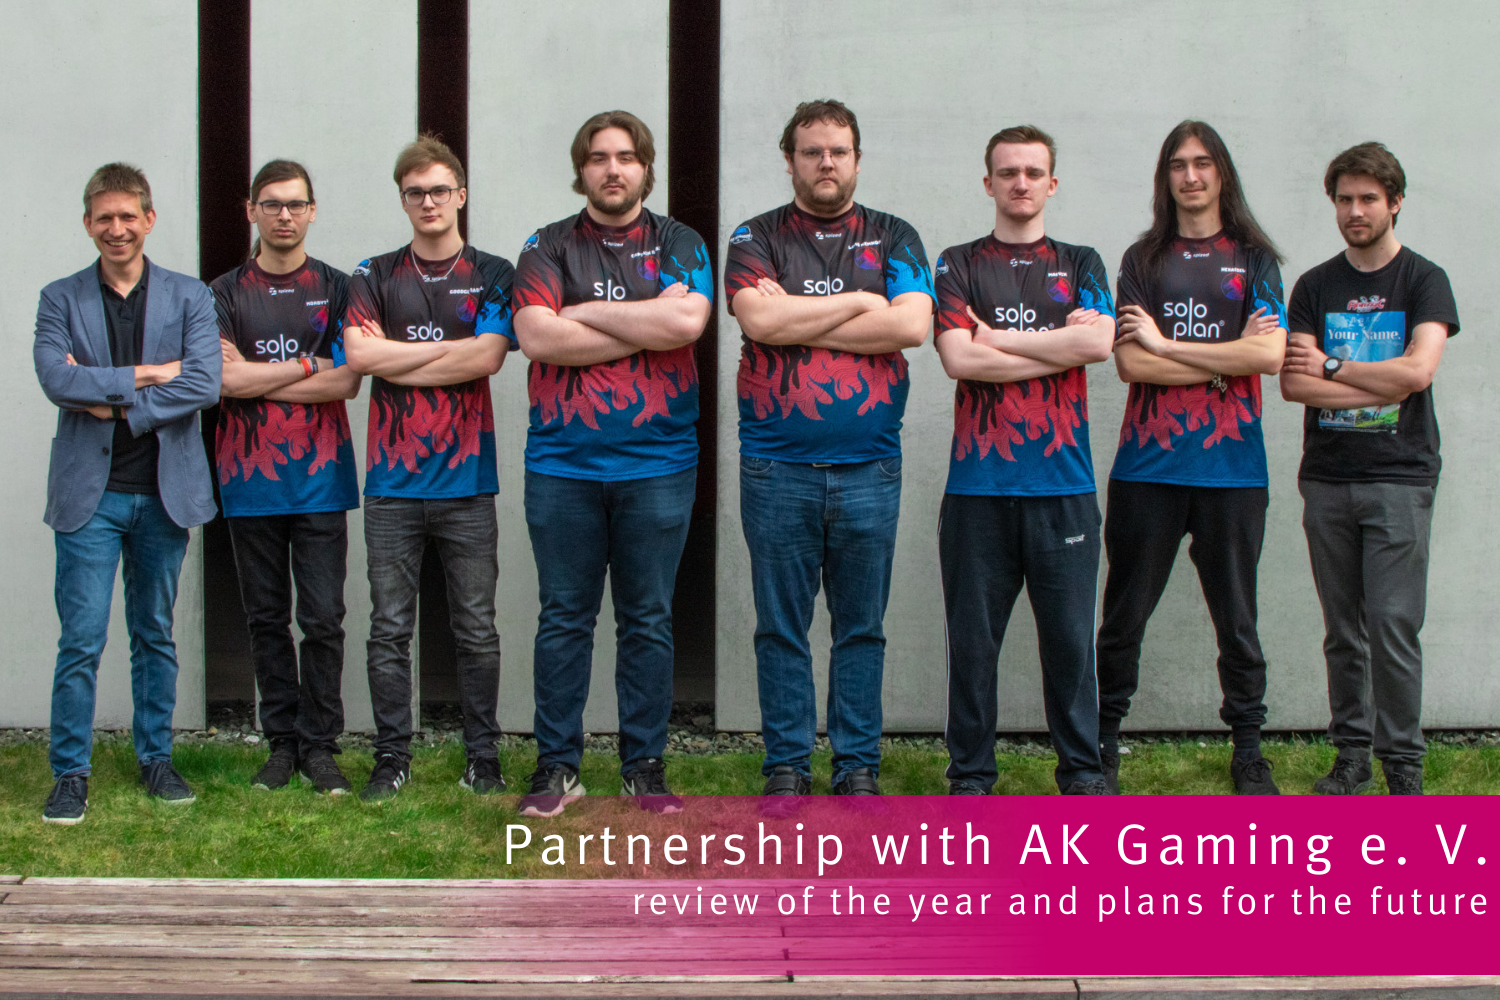 Partnership with the association AK Gaming e. V.–review of the year and plans for the future